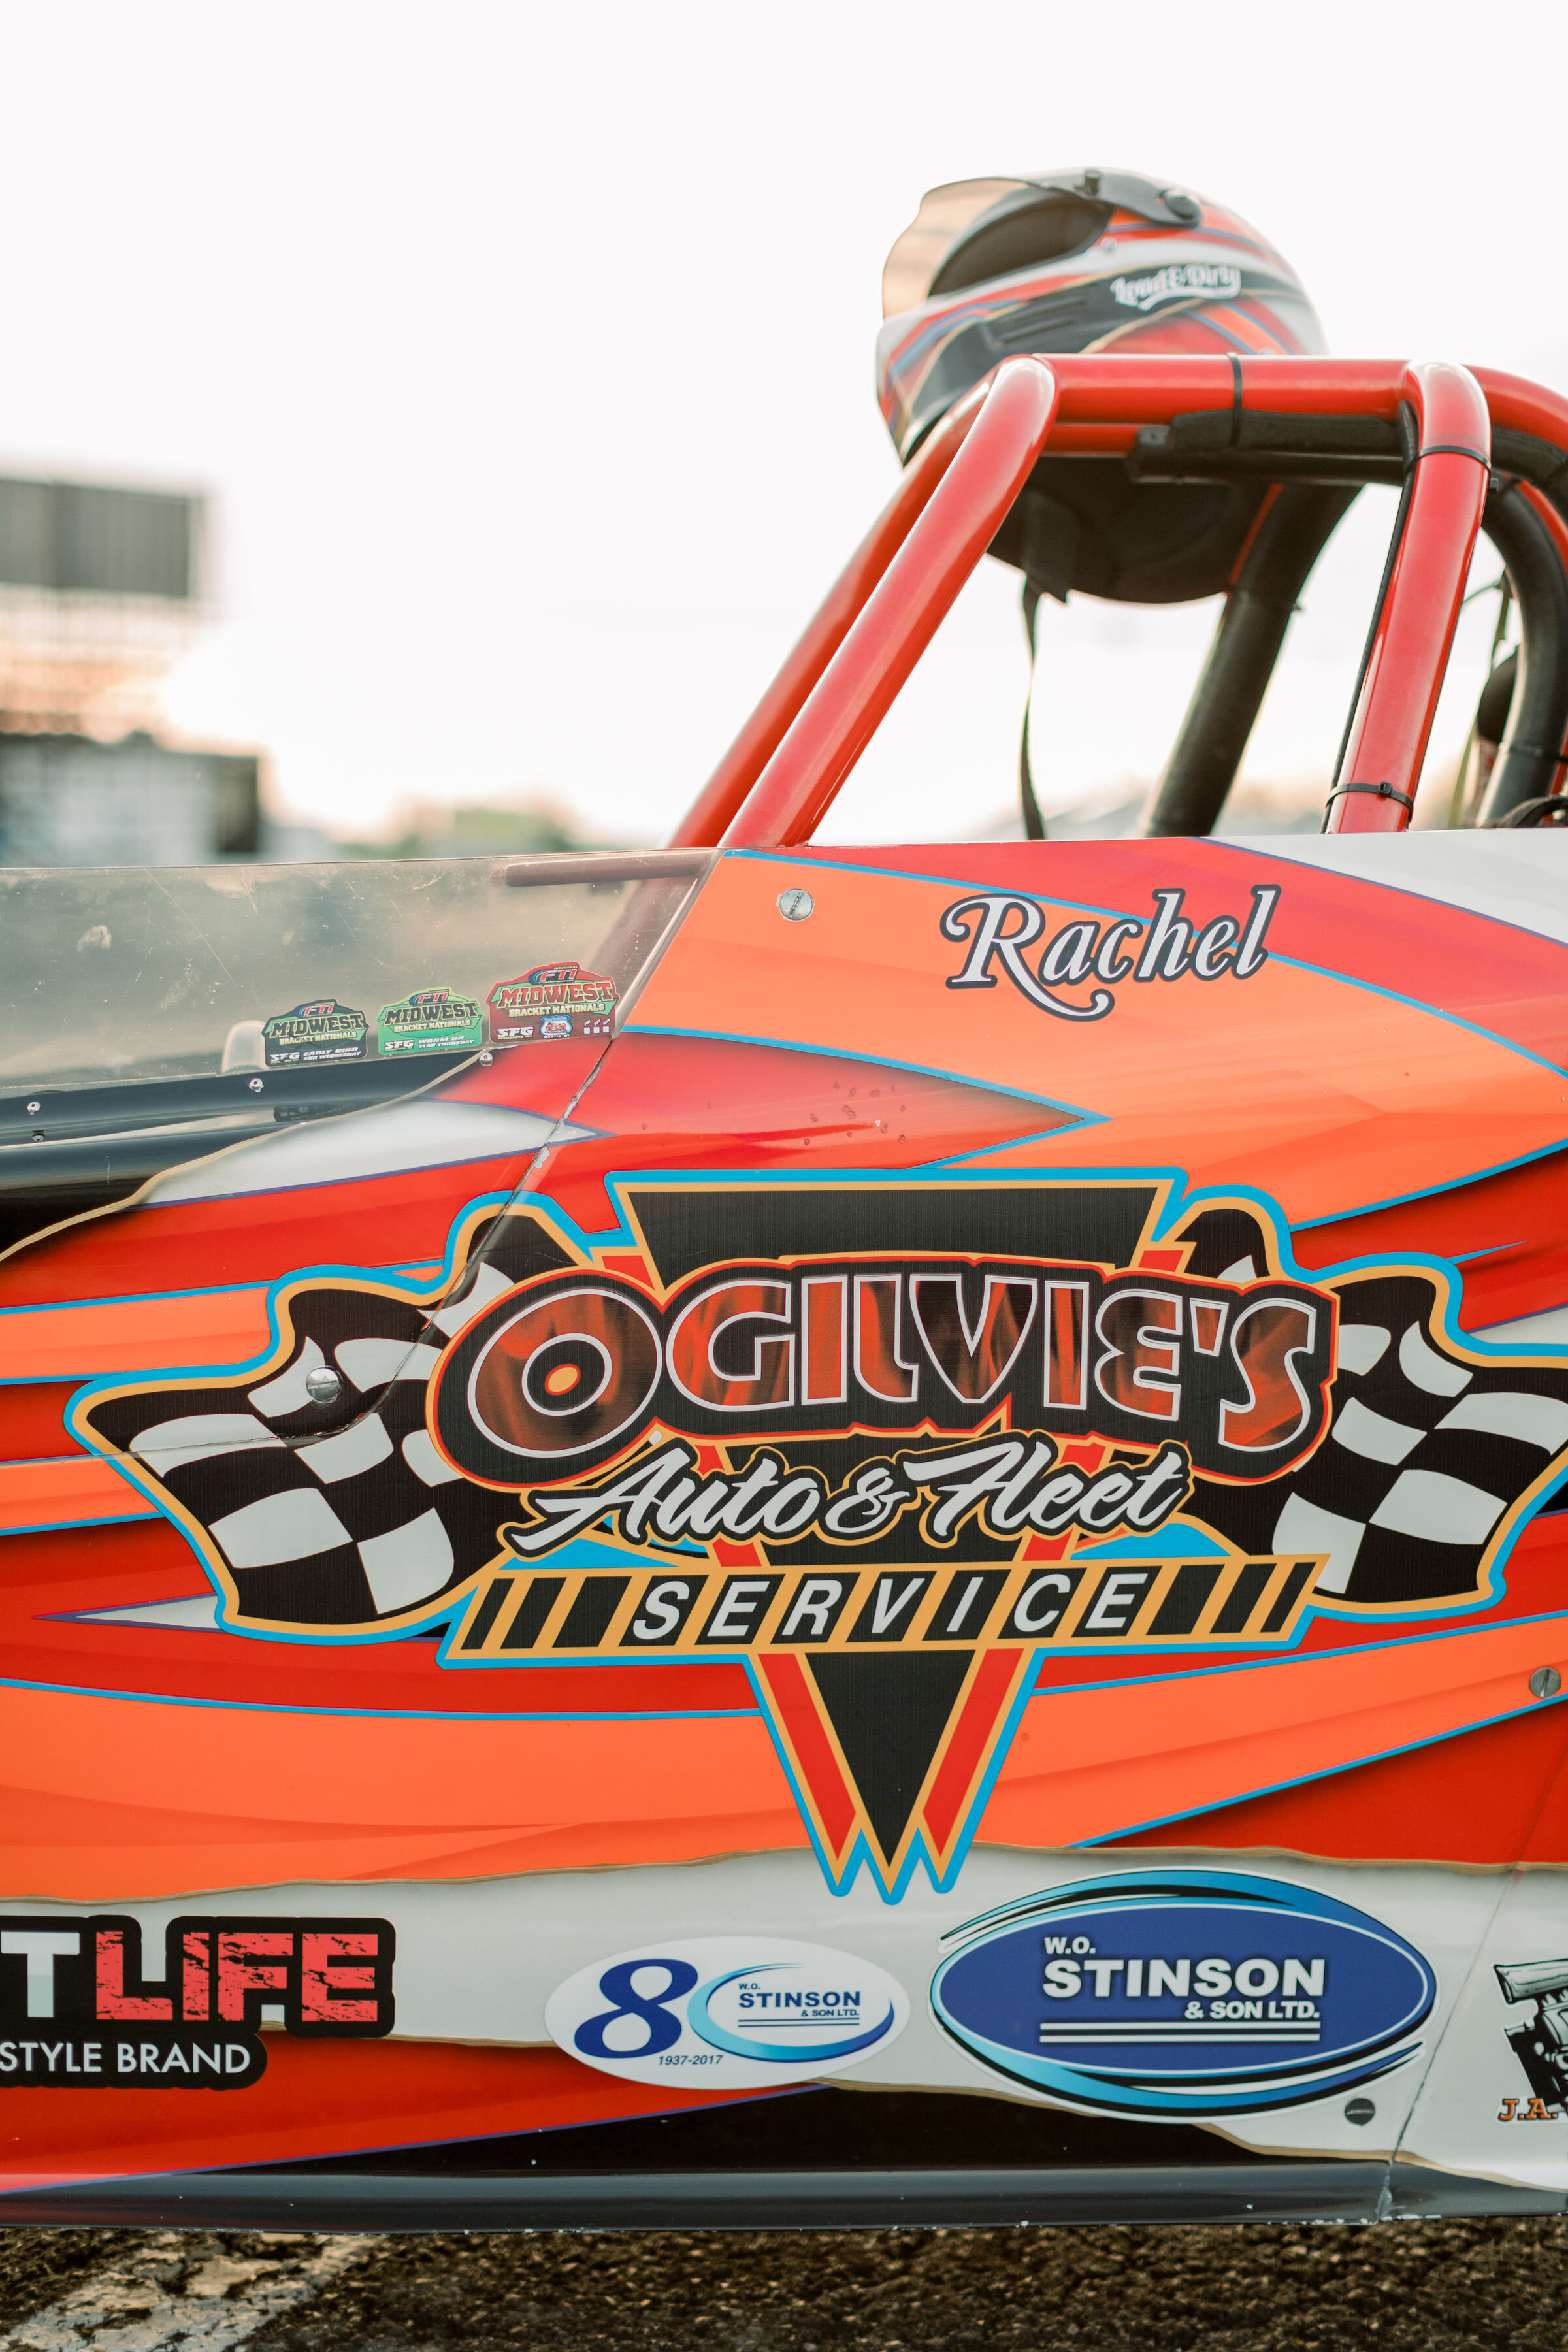  Racecar detail shot with brides name on it by O'gilvies Auto and Fleet Service during an engagement session by Chelsea Mason in Ottawa, ON. perth kingston carleton place best wedding photographer in ottawa details shots for engagements cars in photo